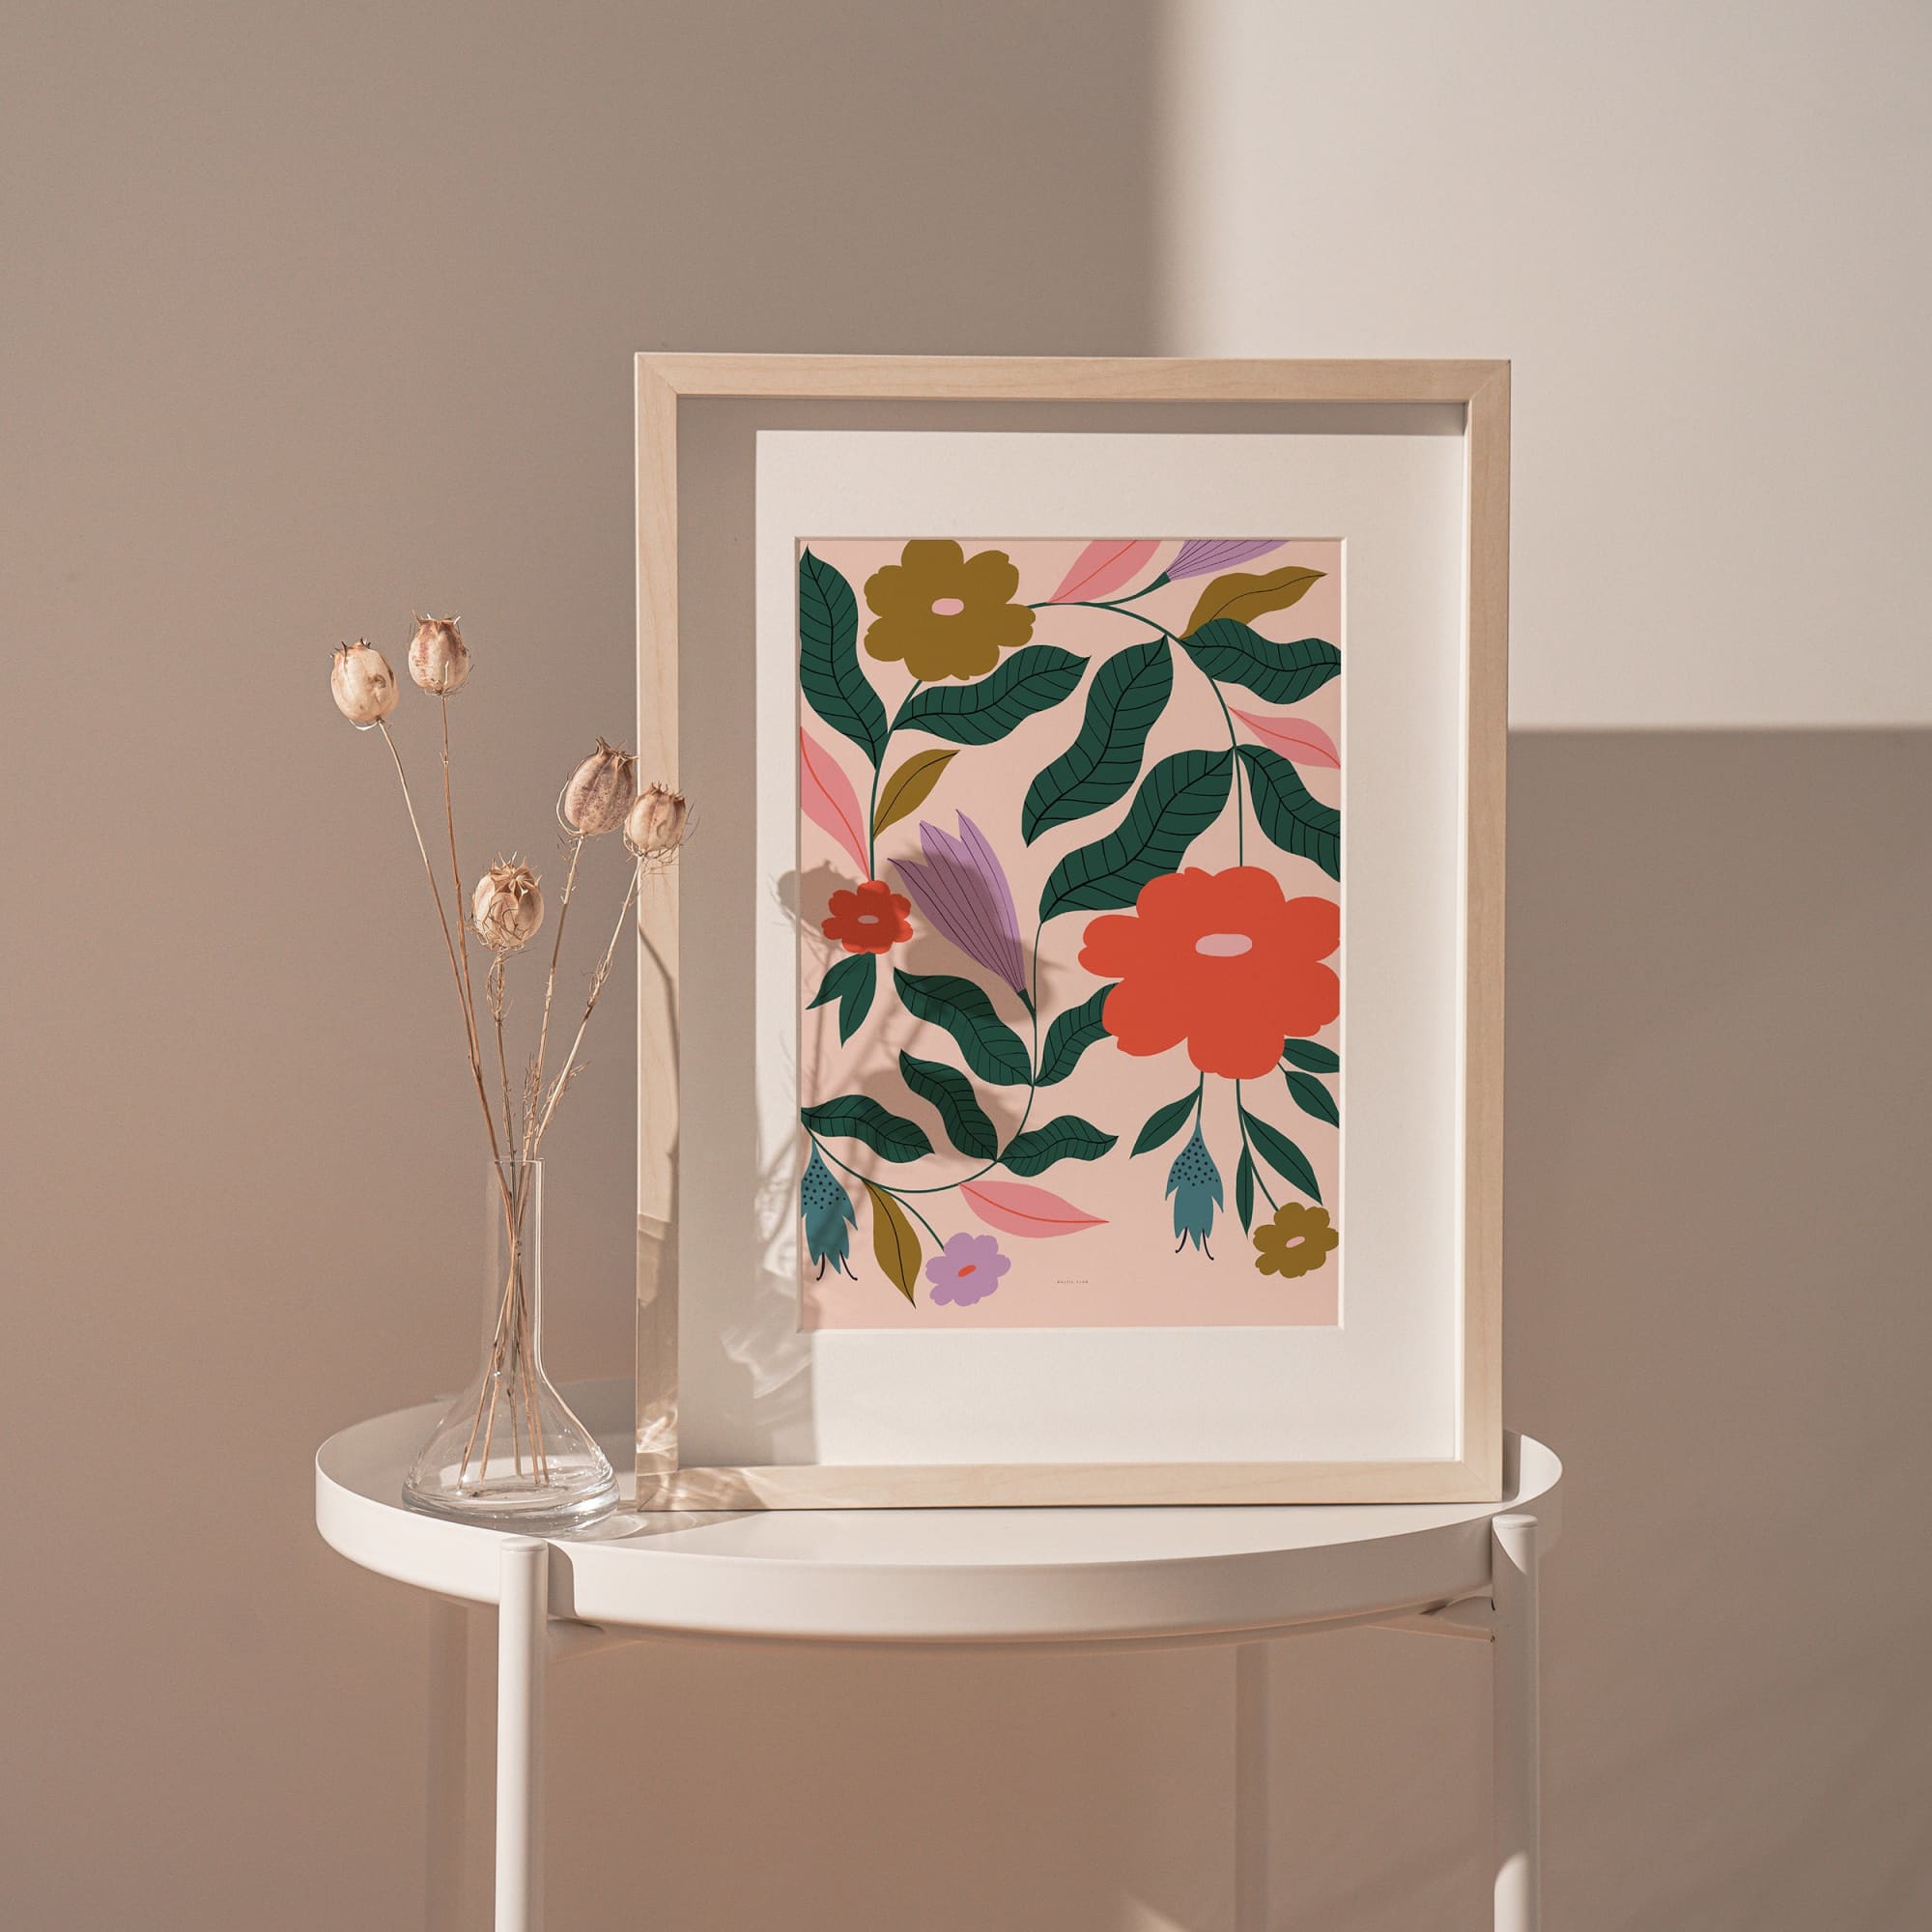 Flowers, by Susan Driscoll. An exclusive design for The Baltic Club, in a wooden frame.